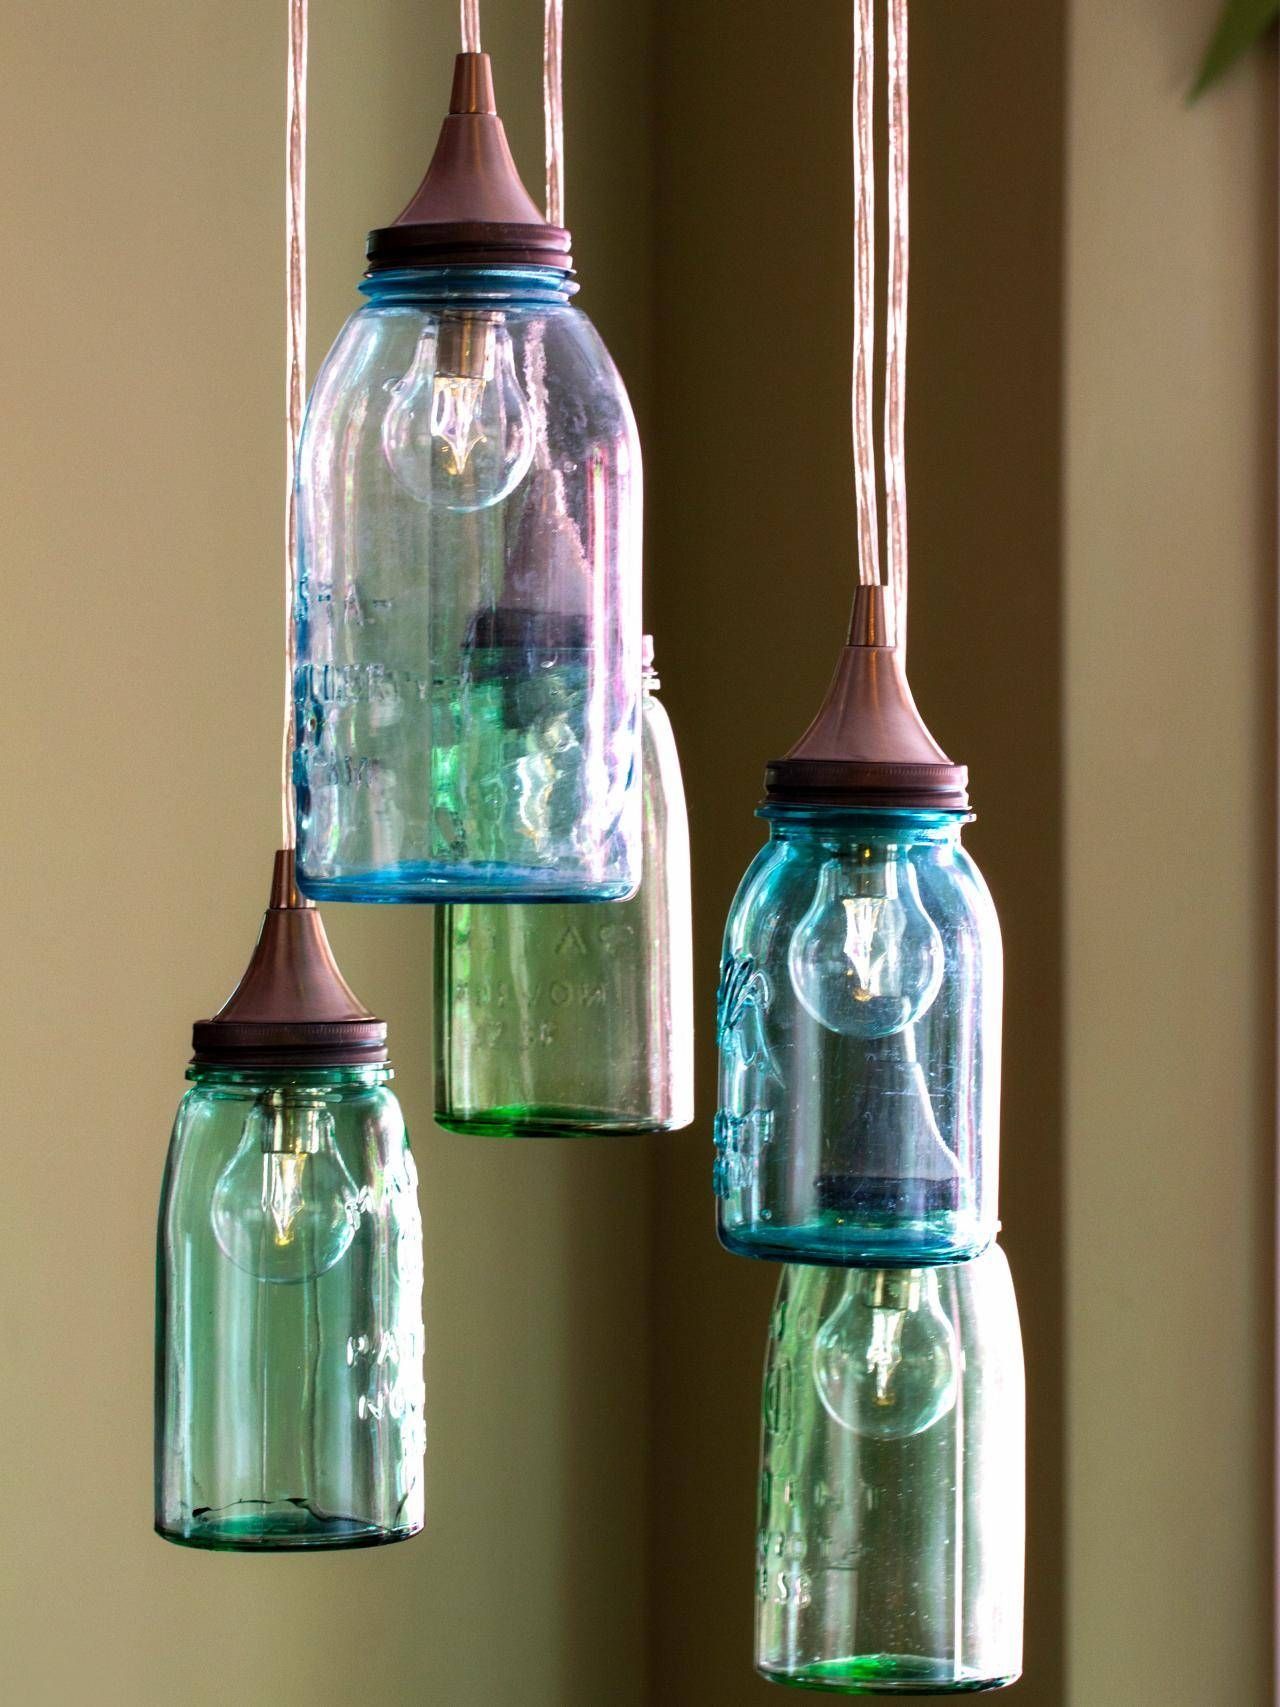 Brighten Up With These Diy Home Lighting Ideas | Hgtv's Decorating Within Glass Jug Lights Fixtures (Photo 10 of 15)